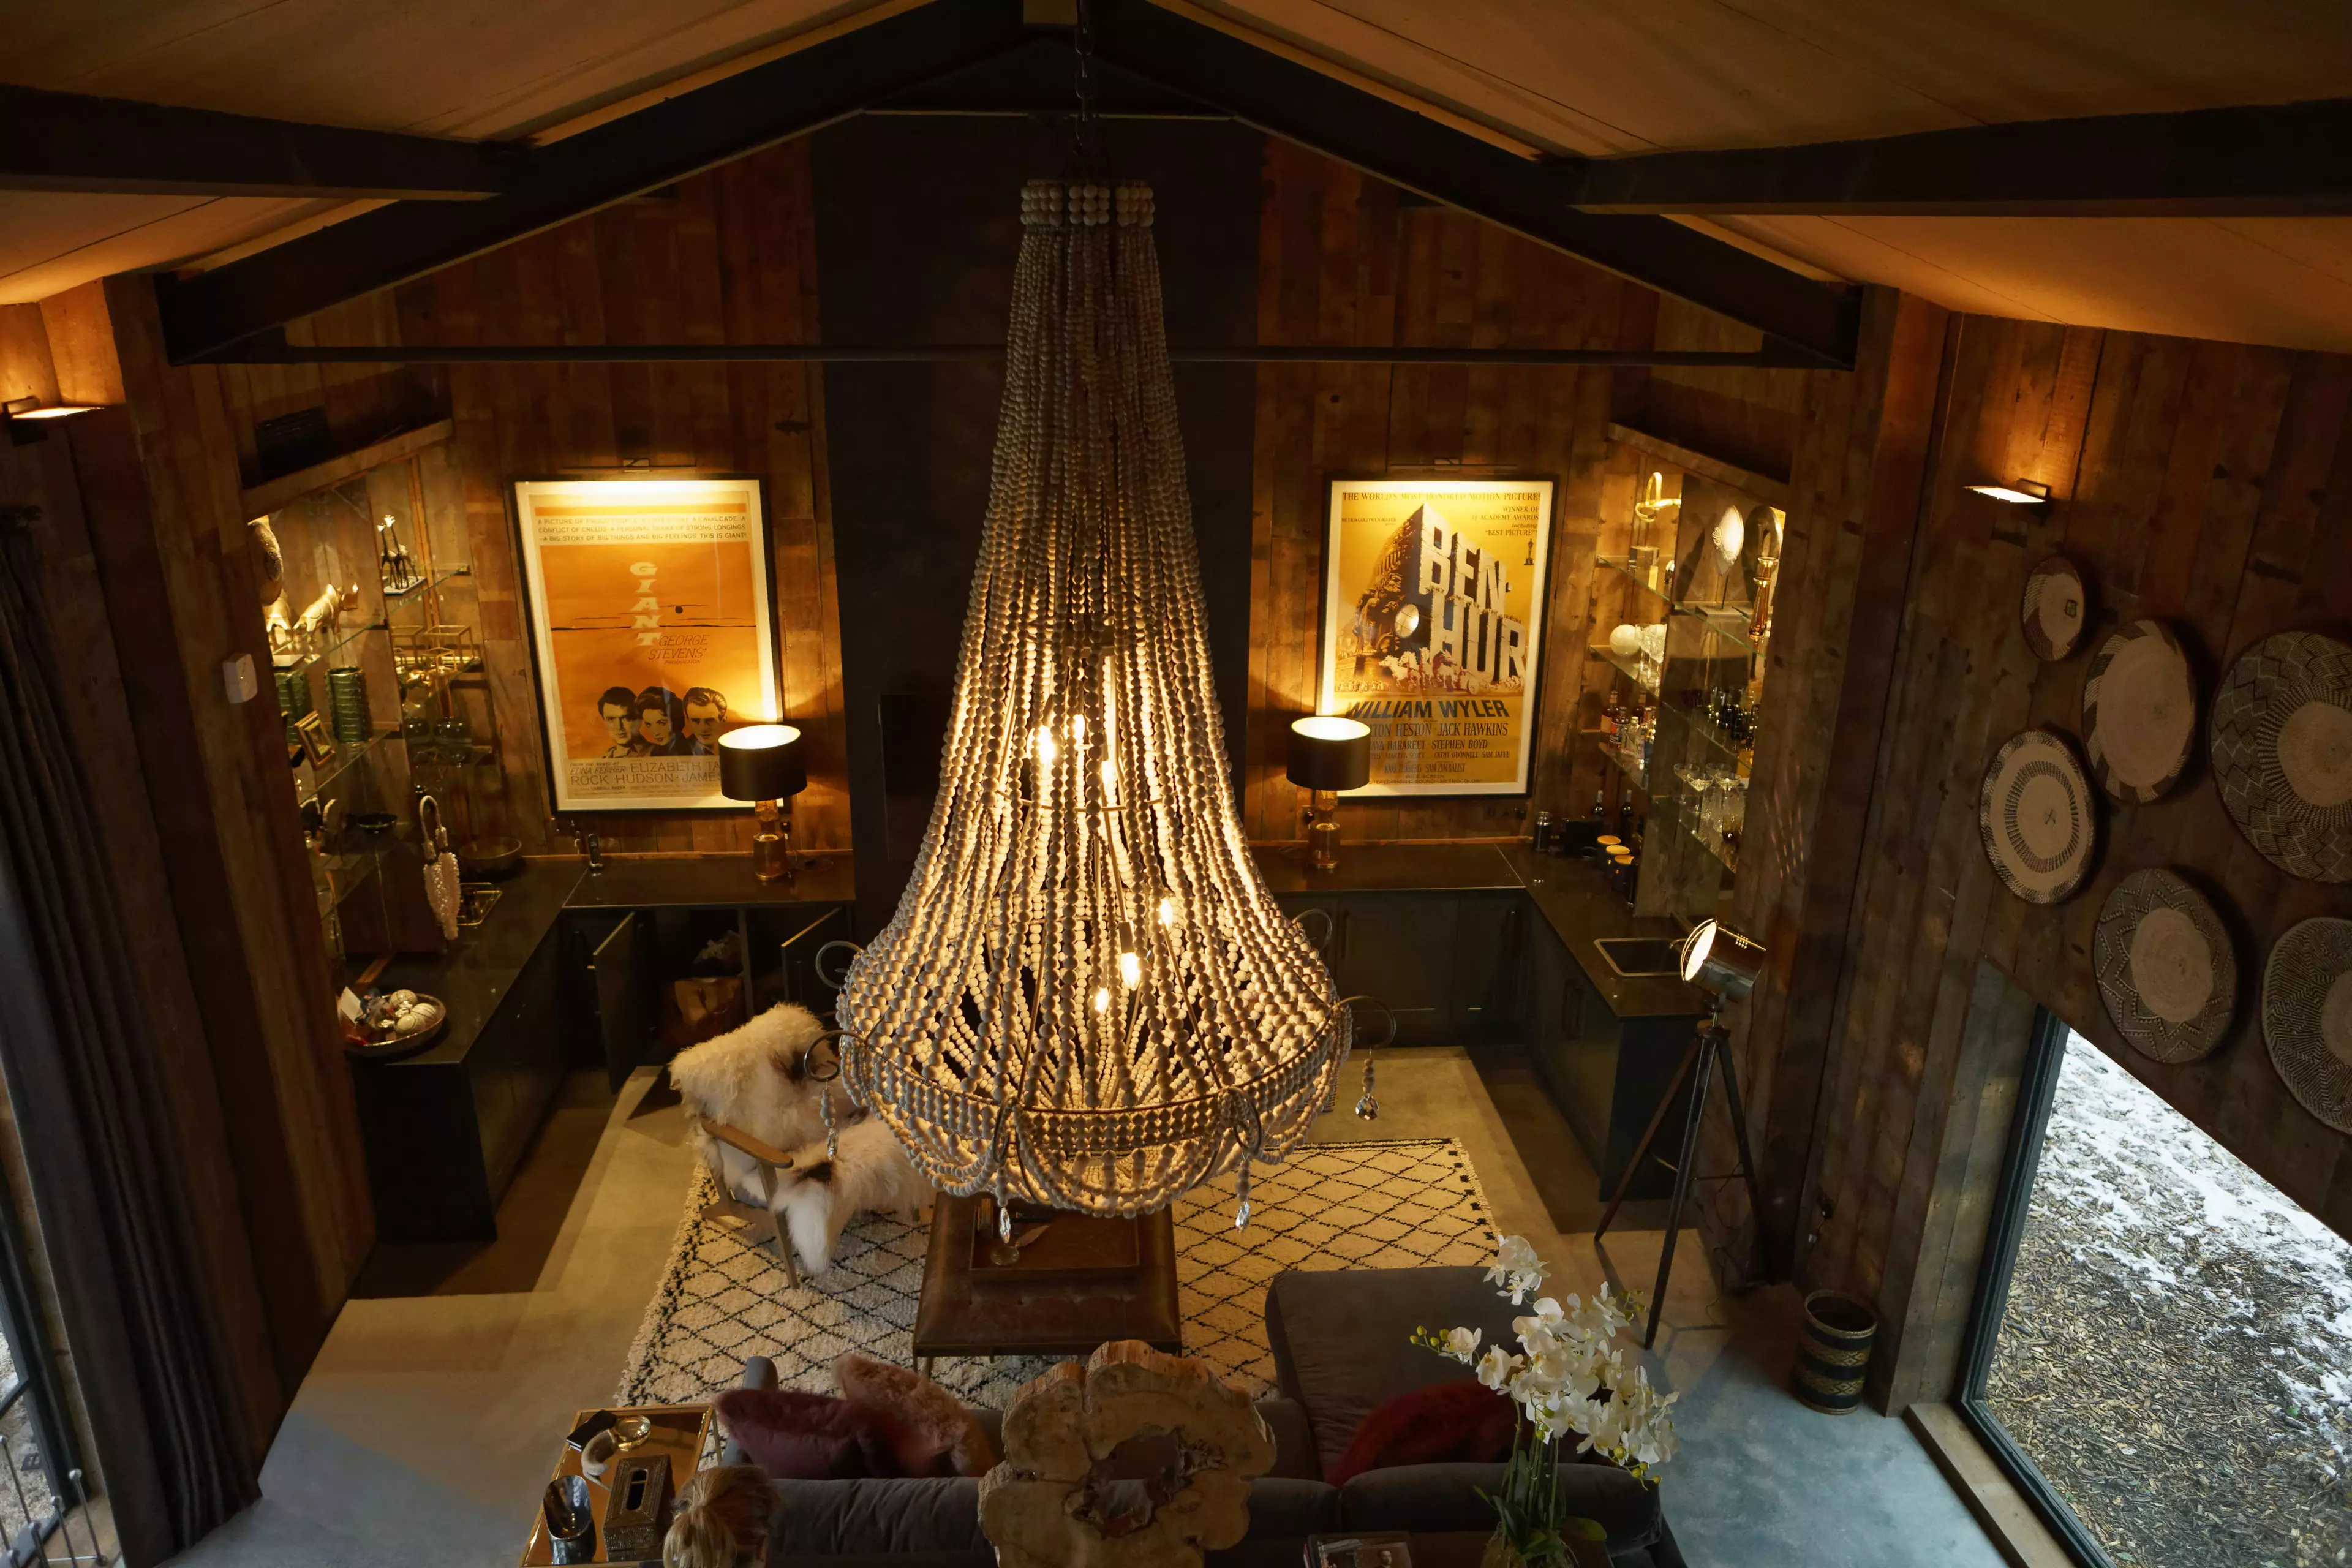 The lodge is seriously luxurious complete with chandelier. (